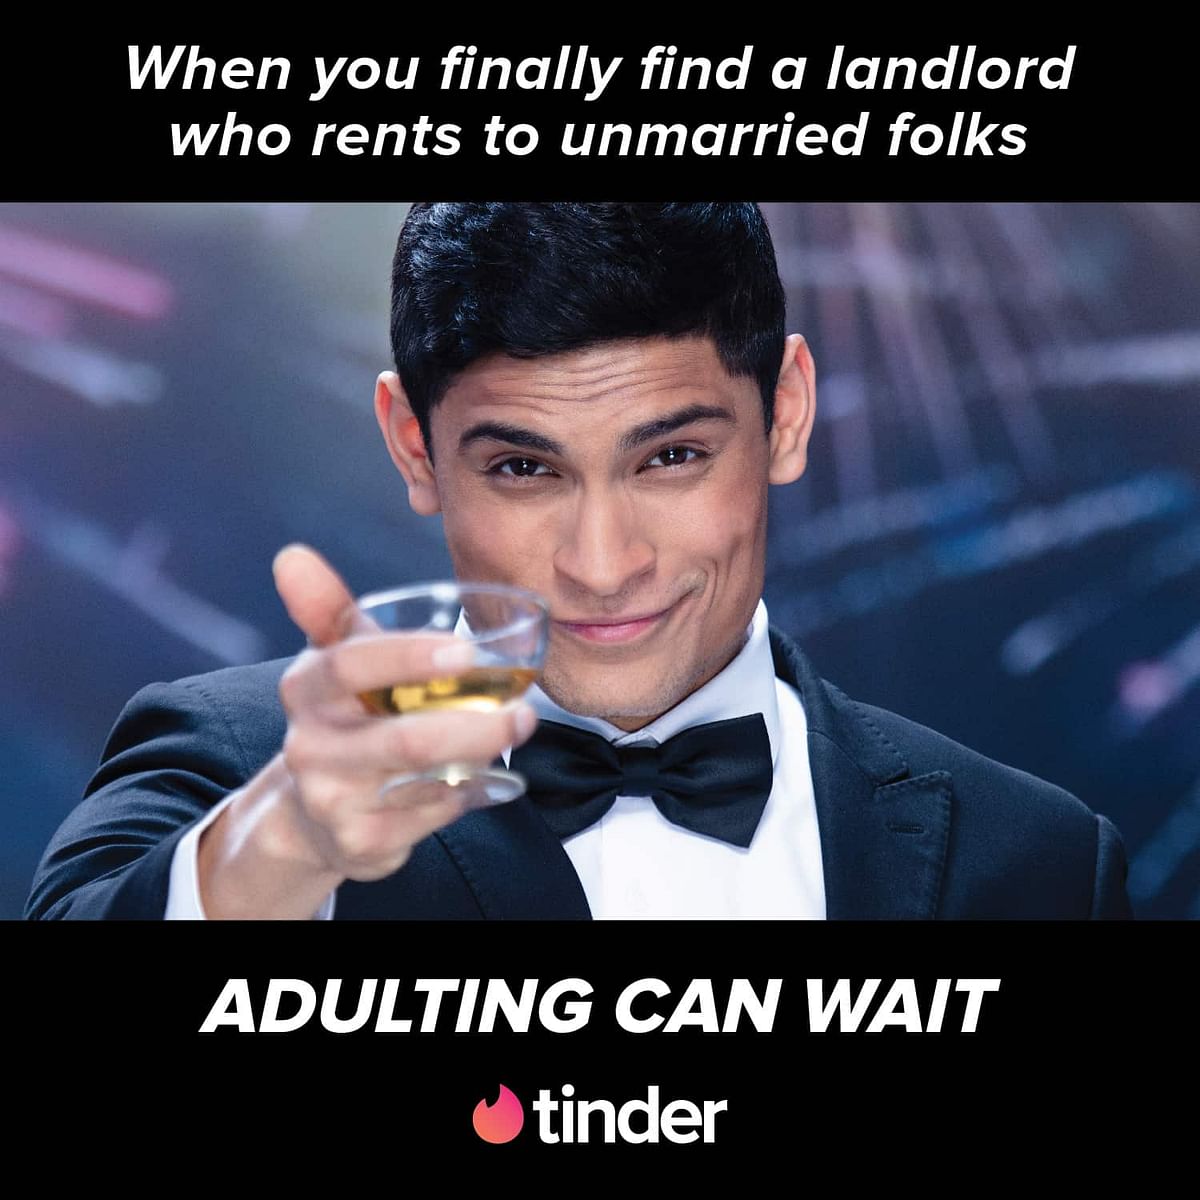 "Adulting can wait" says Tinder in new ads